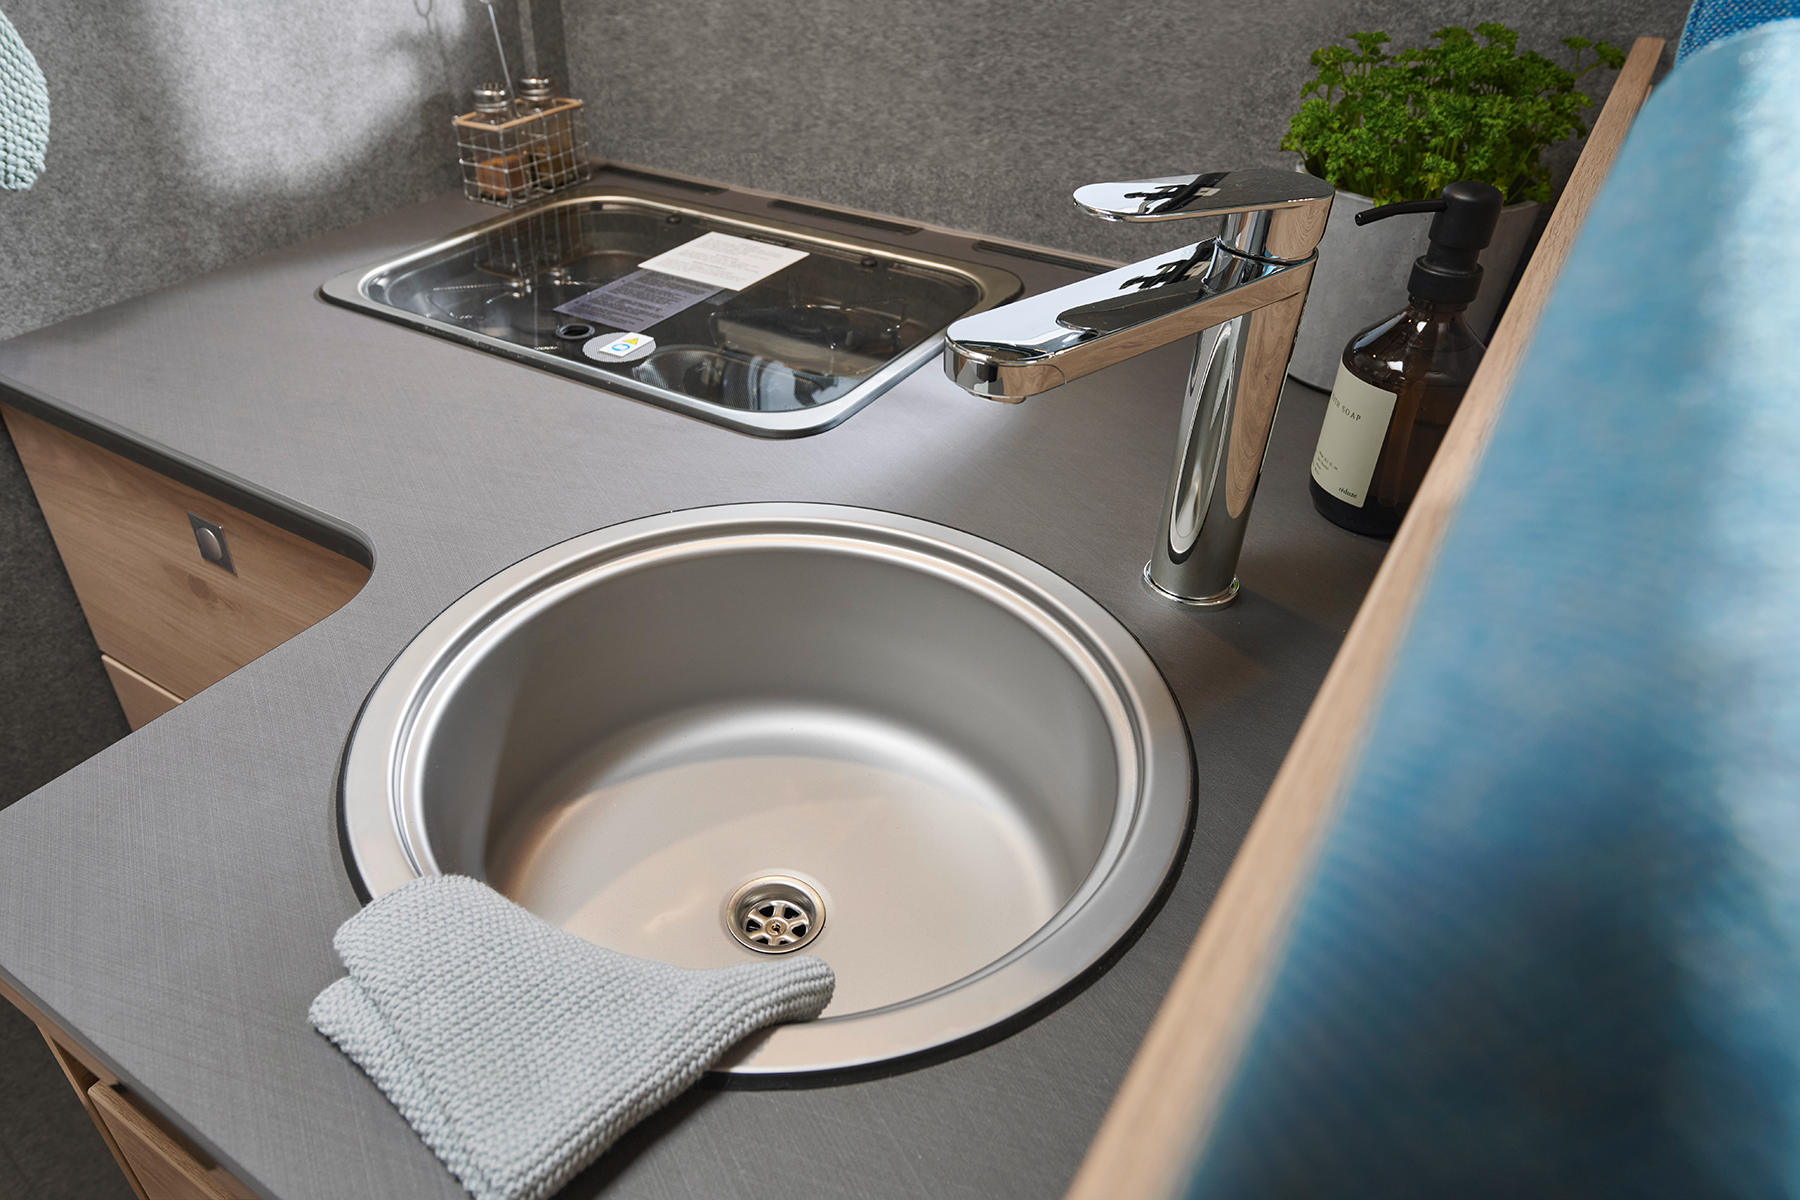 Even large pots and pans can be easily washed in the wide sink with a high tap.